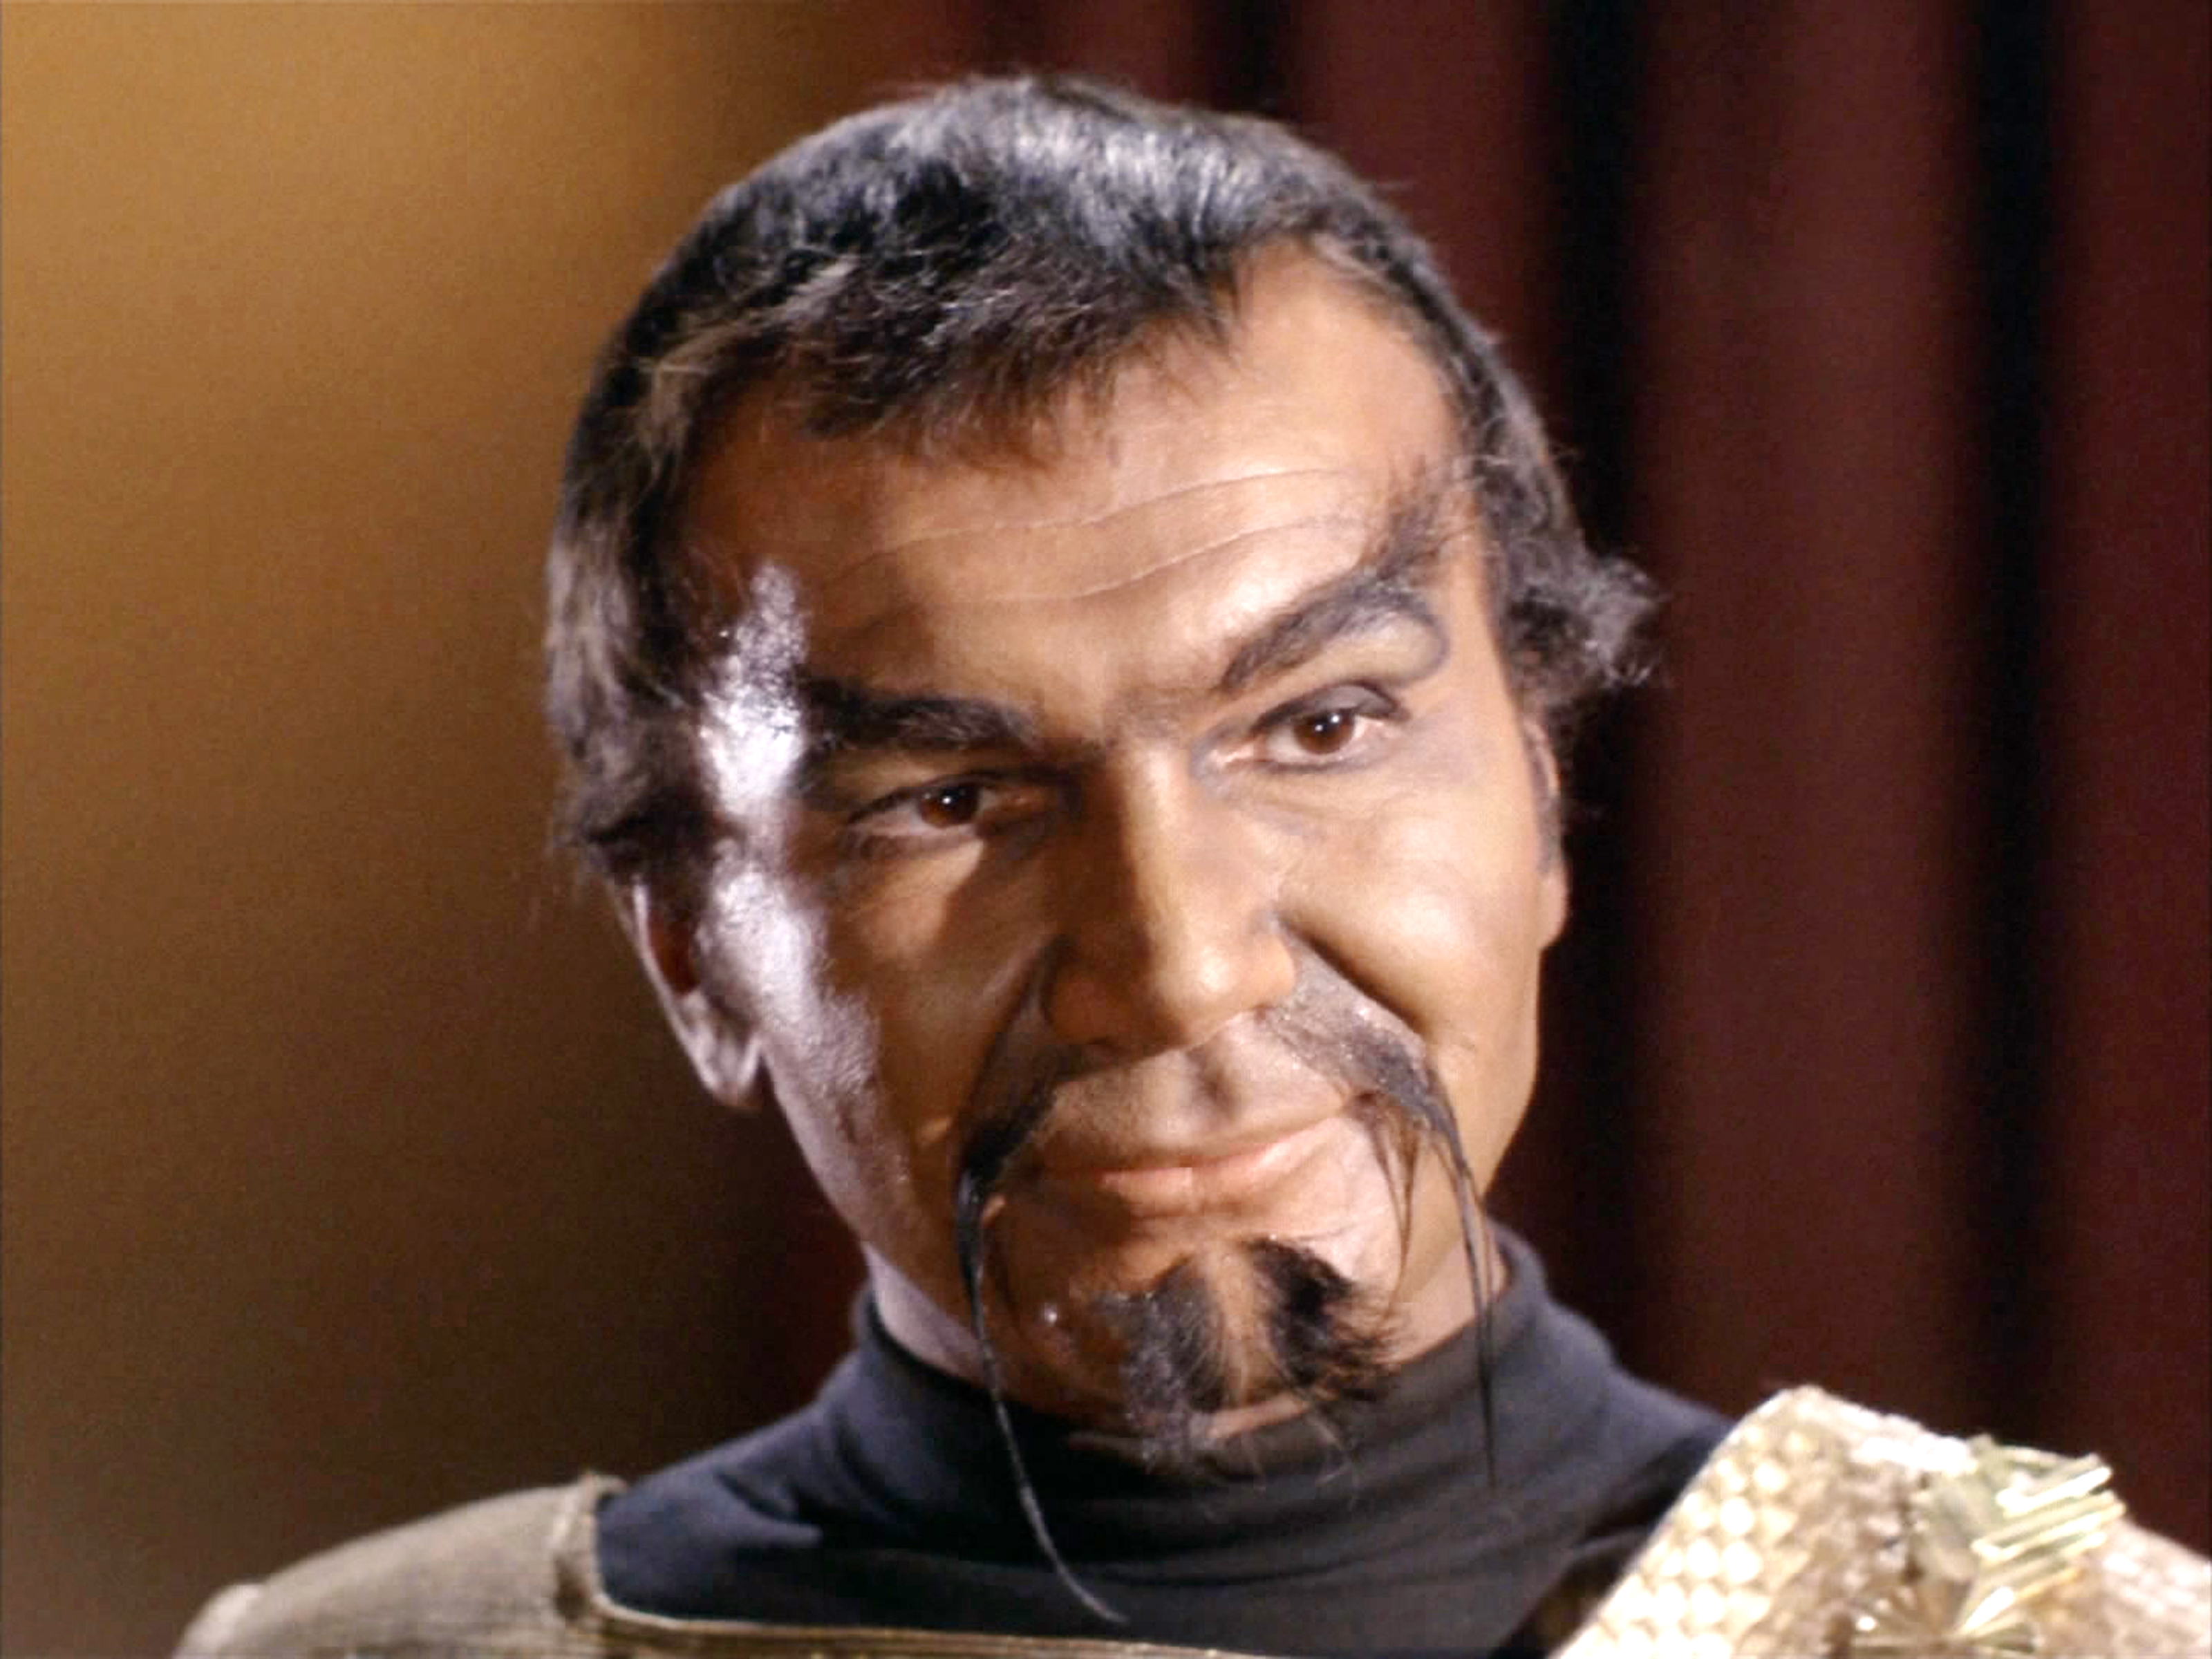 Seen here, John Colicos as Kor (a Klingon) in the STAR TREK episode, "Errand of Mercy." (CBS Photo Archive&mdash;CBS via Getty Images)